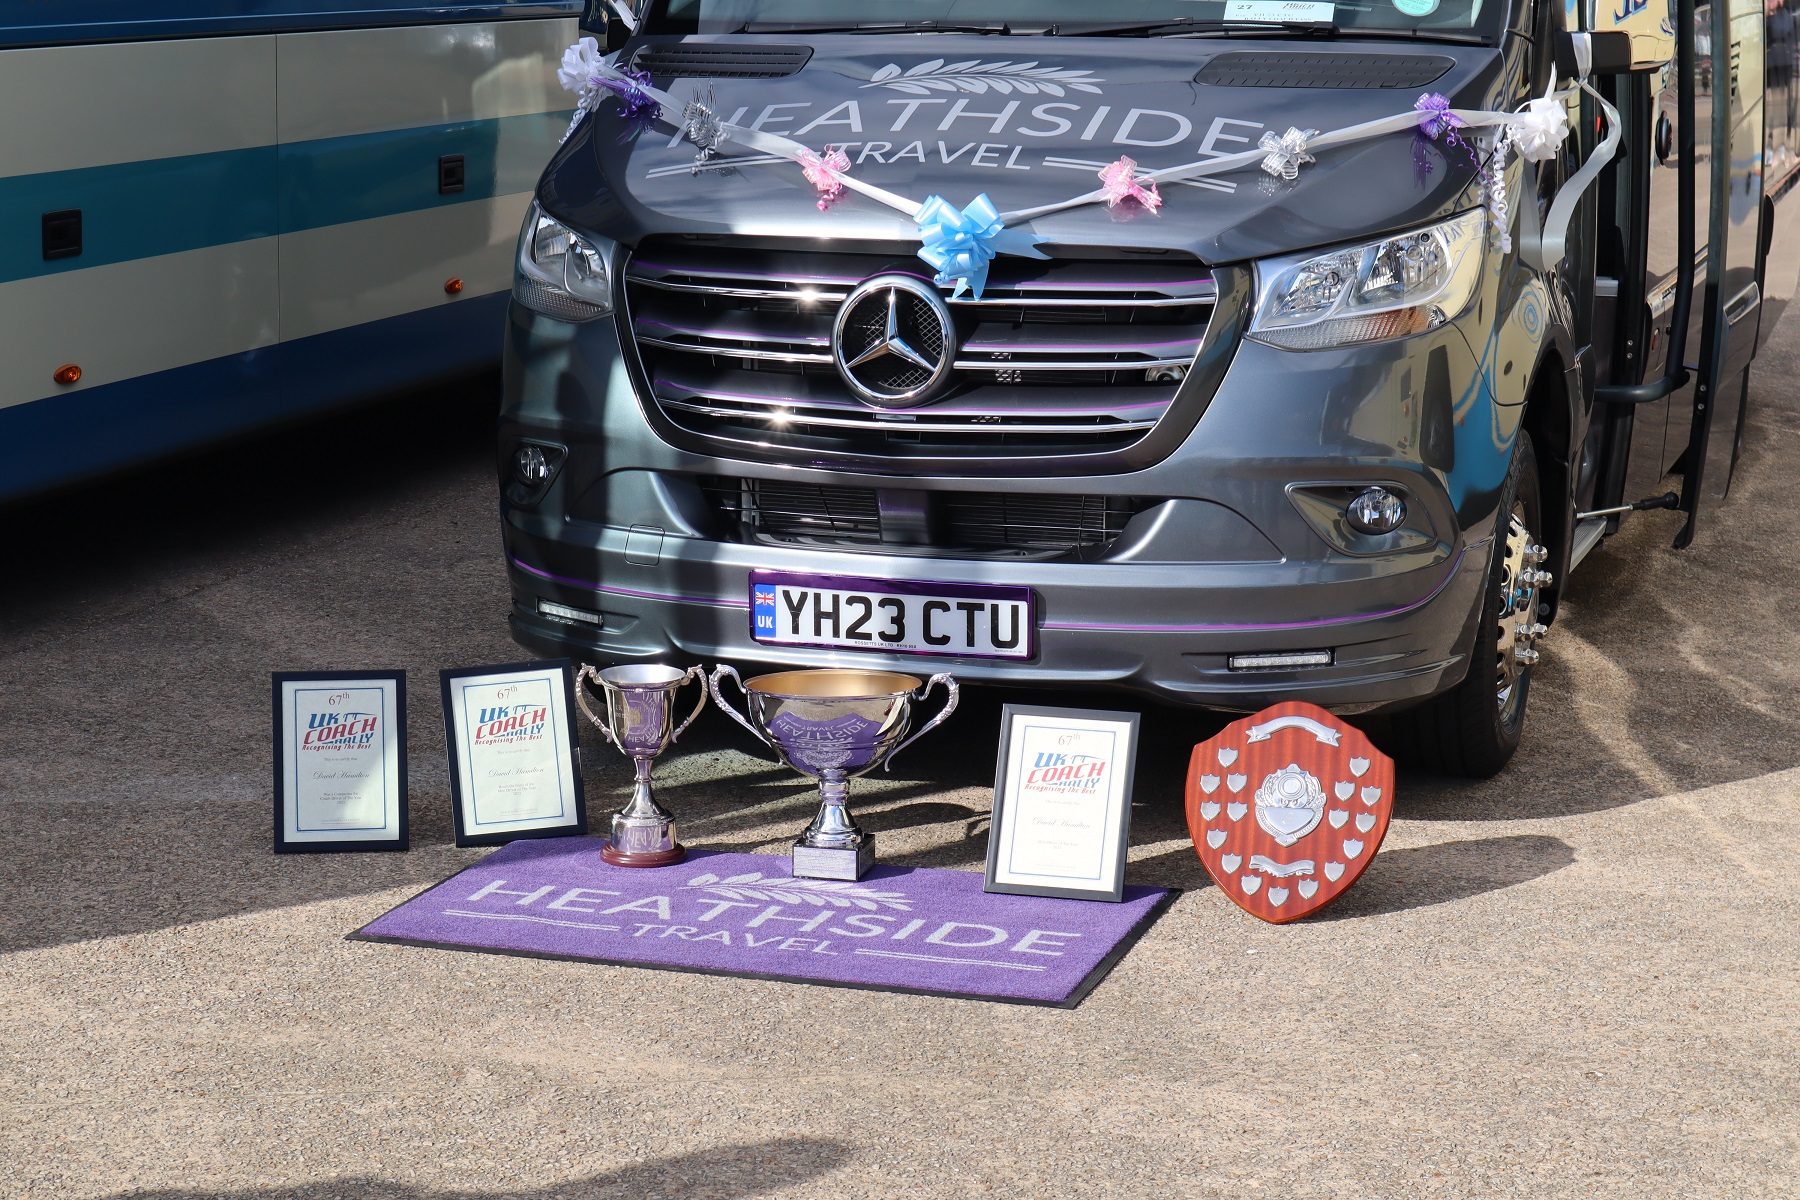 Heathside Travel winners trophy collection at 2023 UK Coach Rally